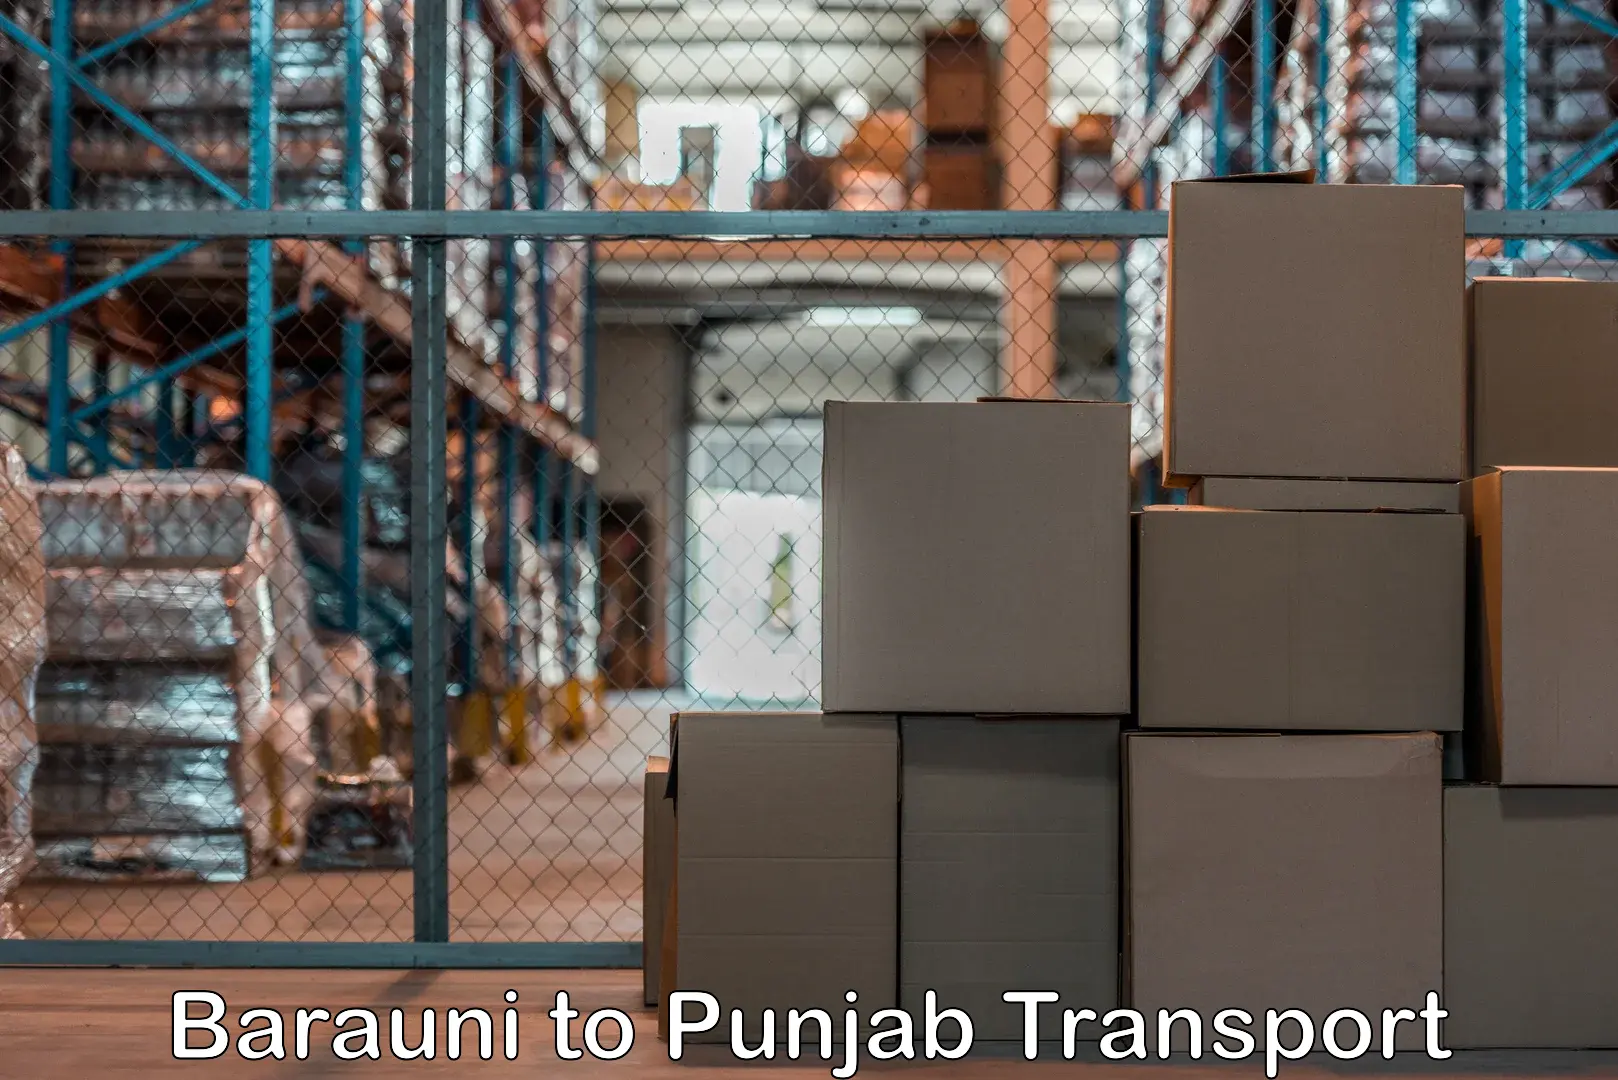 Commercial transport service Barauni to Punjab